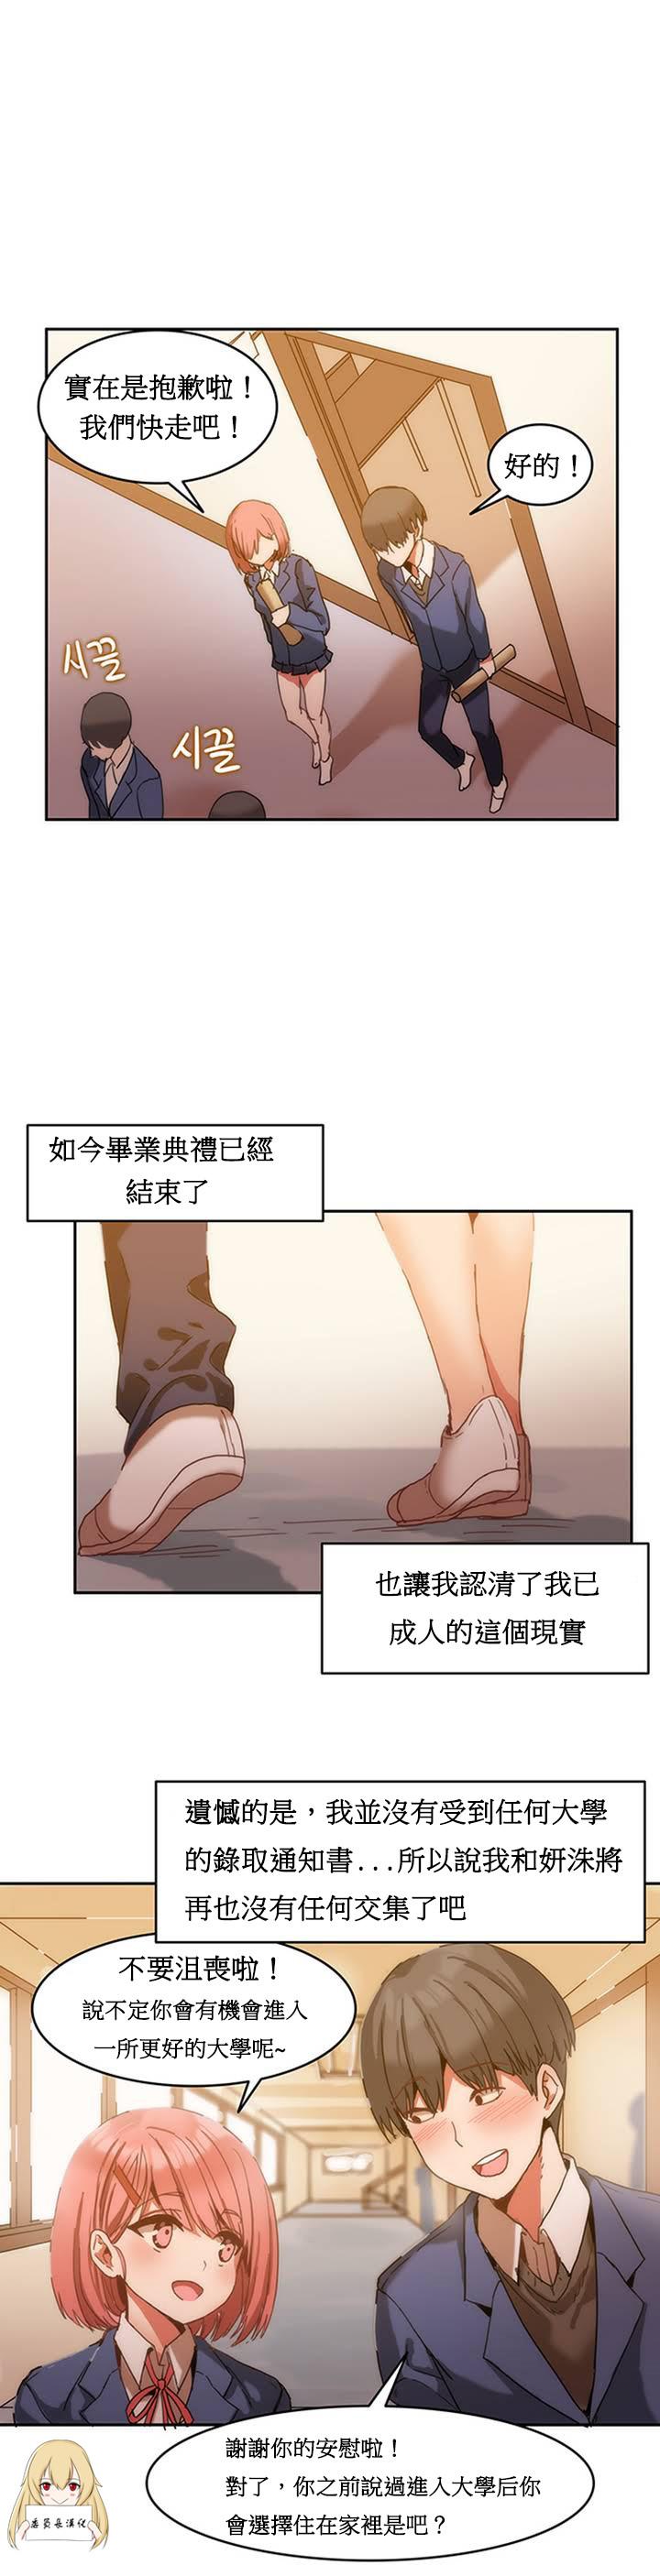 Freaky Hahri's Lumpy Boardhouse Ch. 1~18【委員長個人漢化】（持續更新） Nice - Page 6